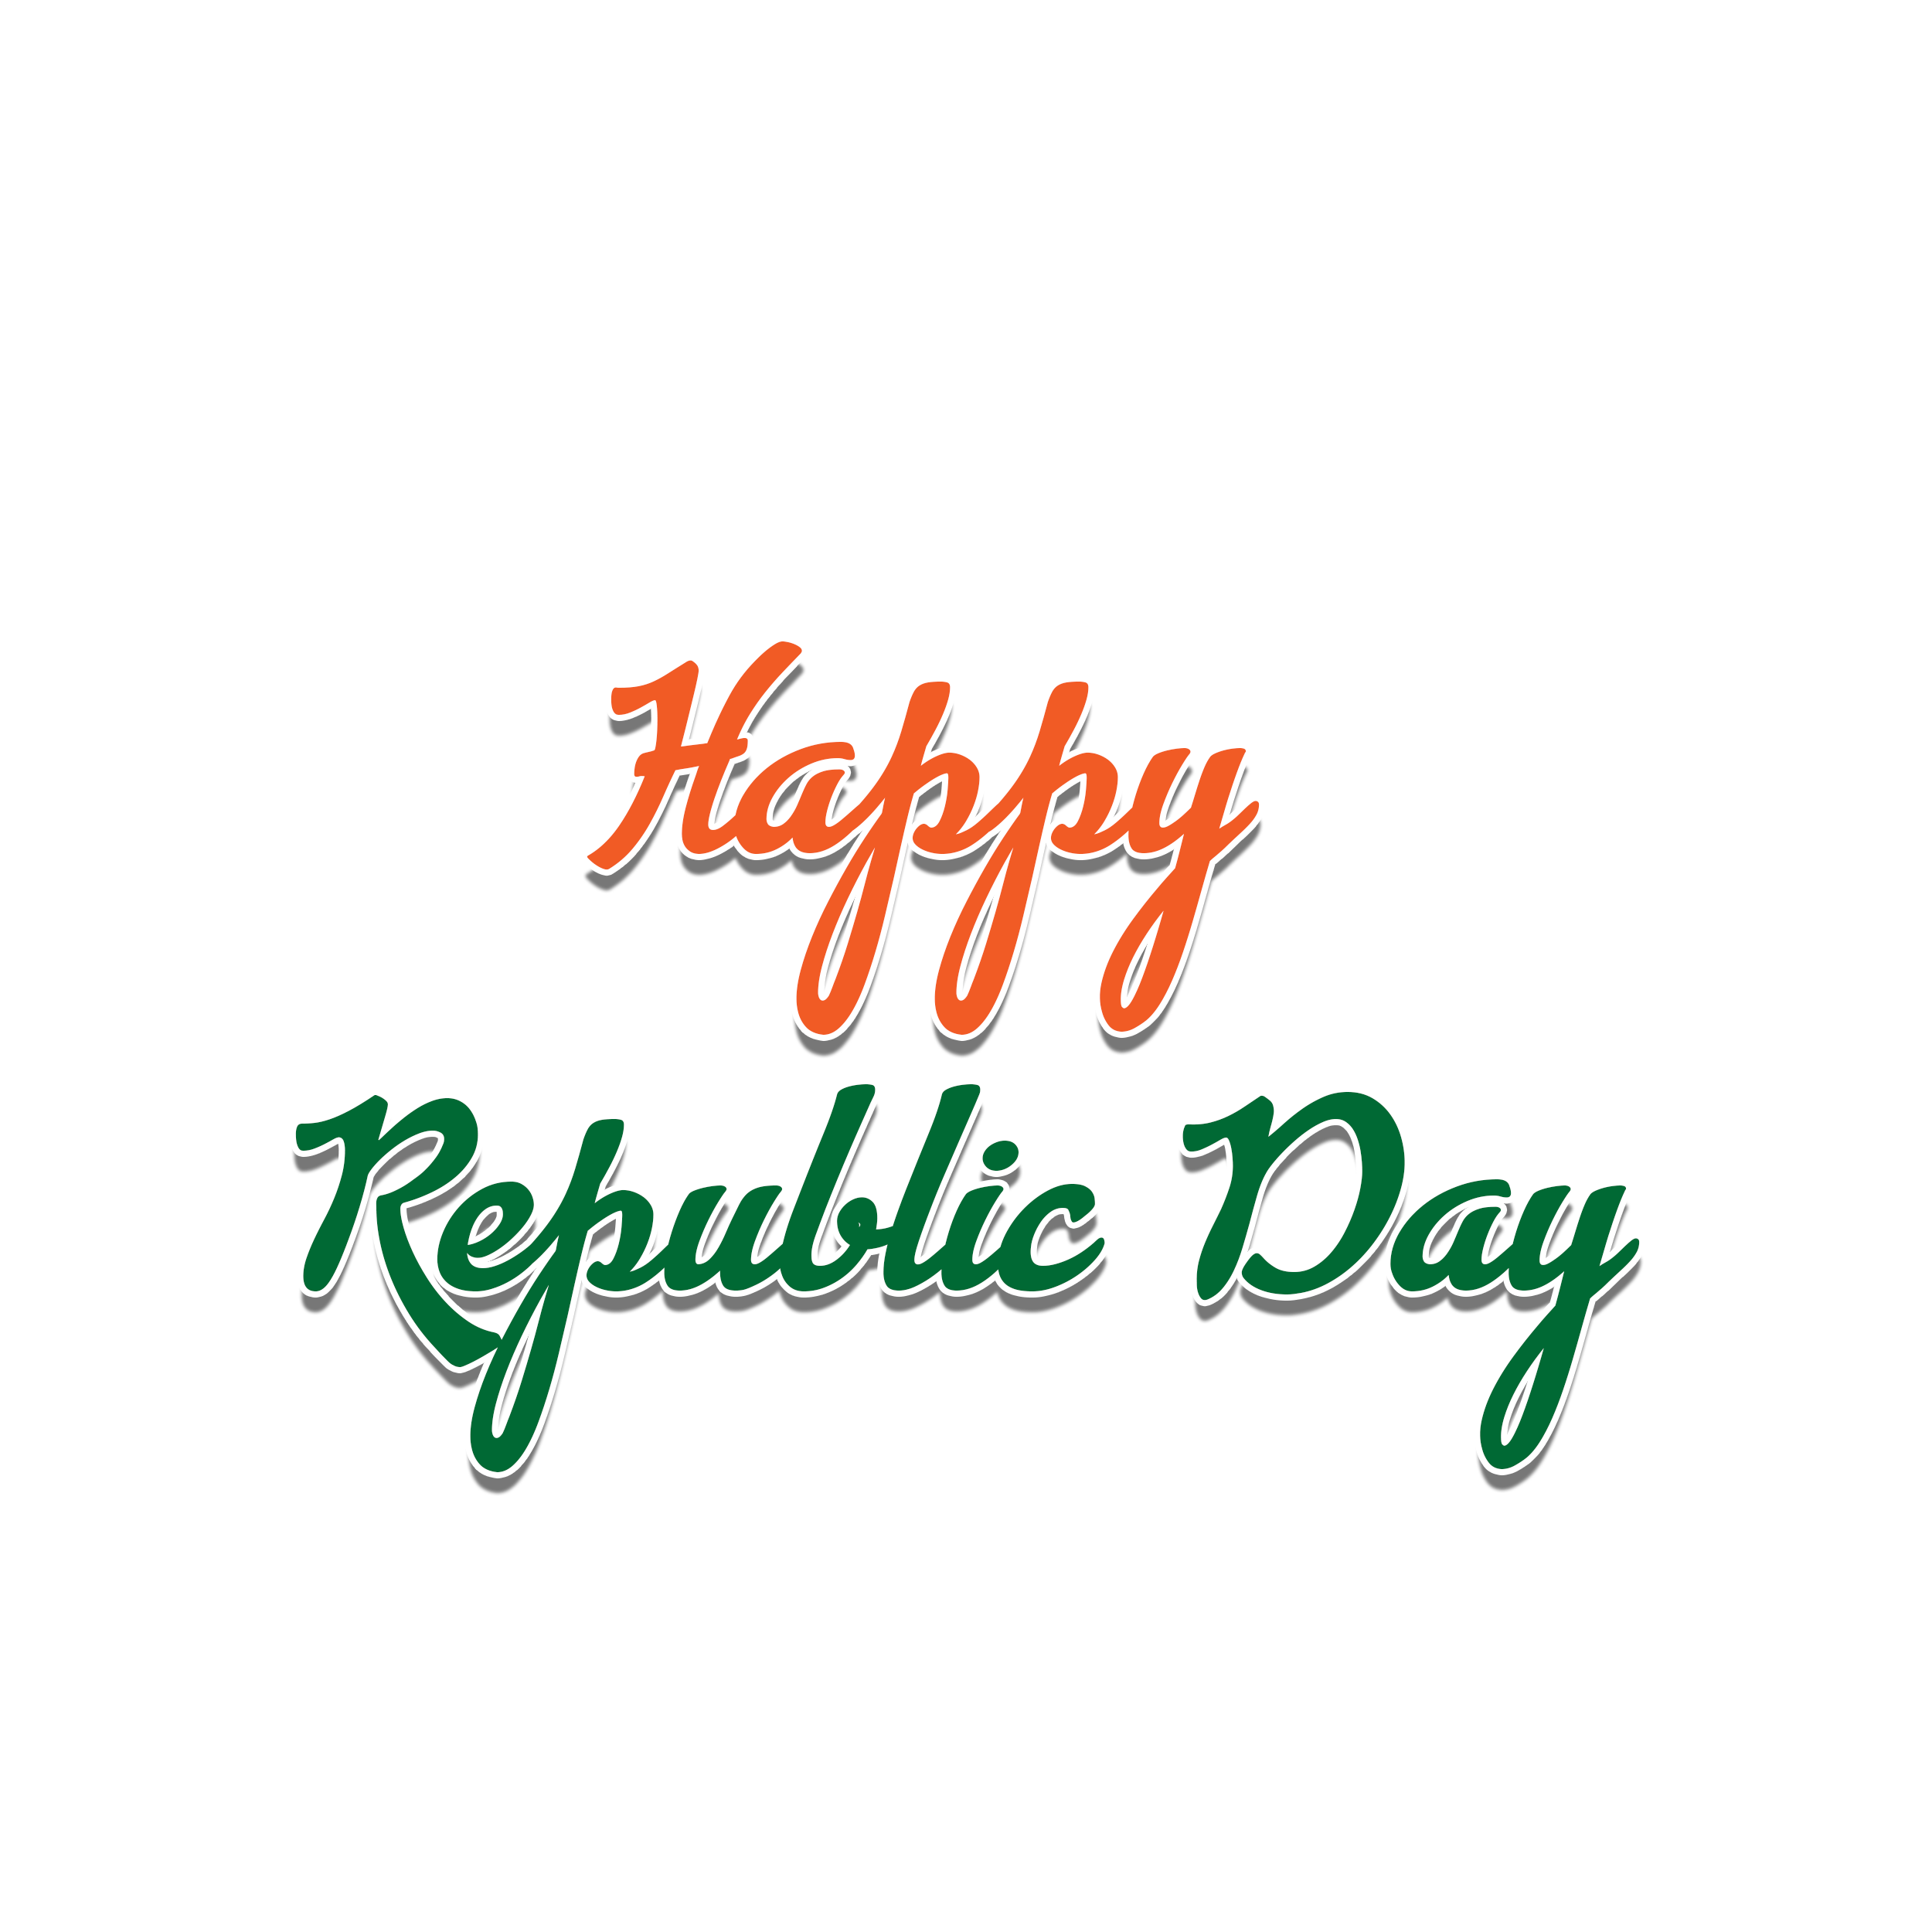 Happy Republic Day Png Image Free Download